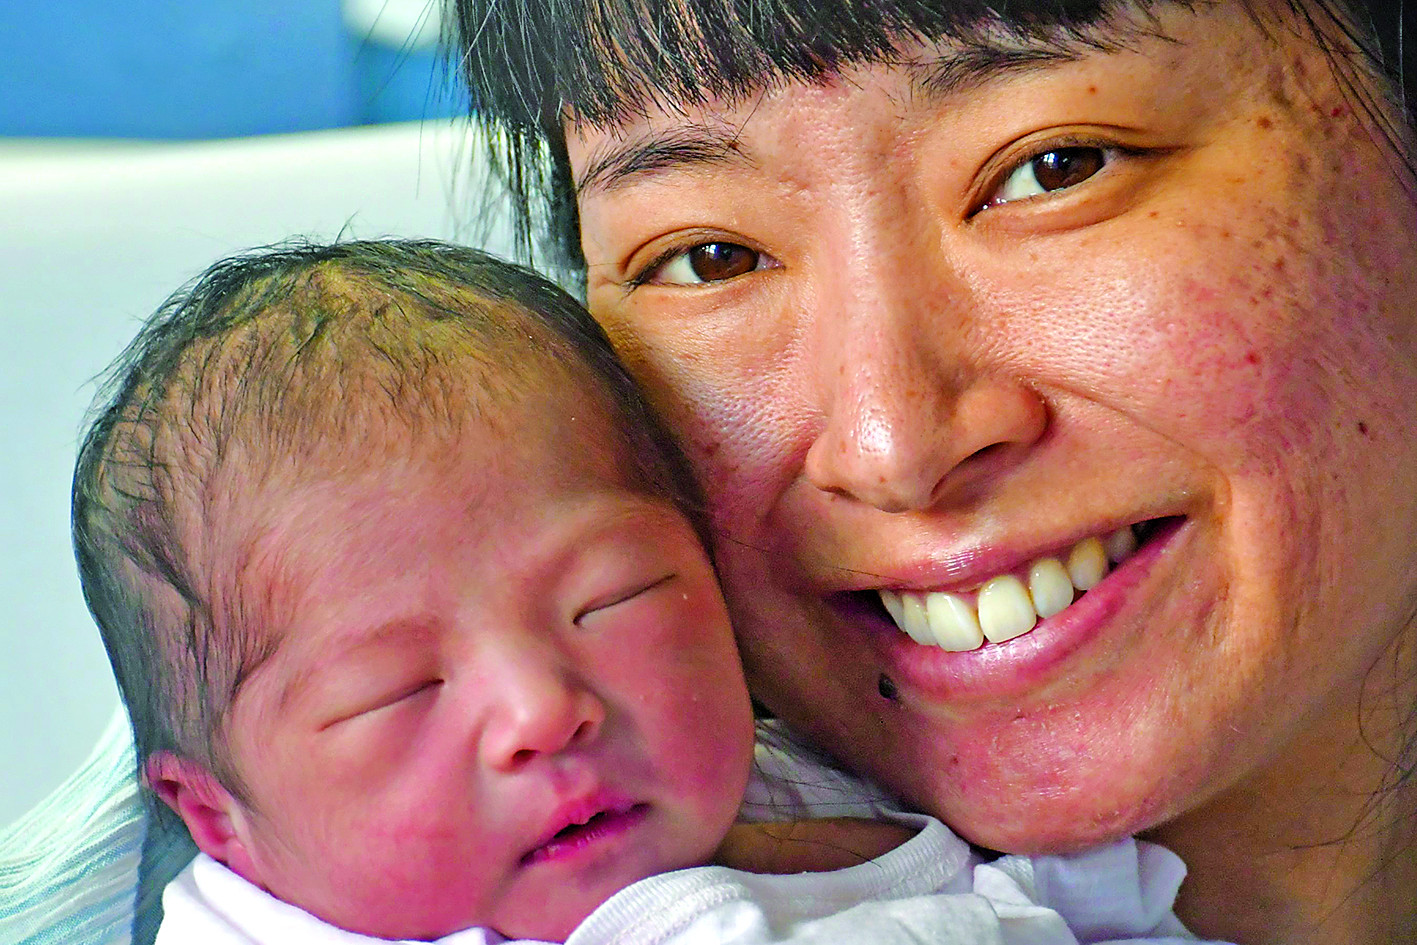 PICTURED: Yumi Mizuno with her first baby daughter Haruka, born on 2 January.